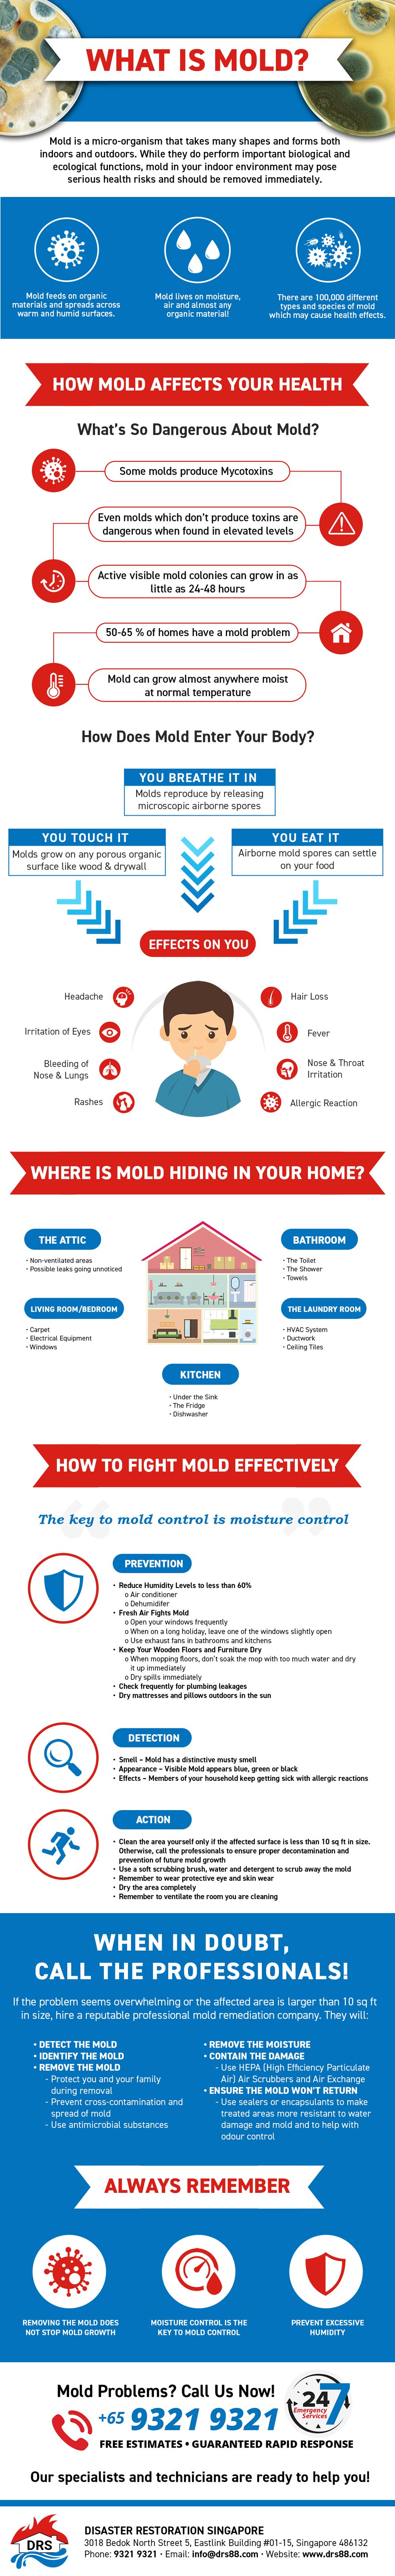 What is Mold? Infographic